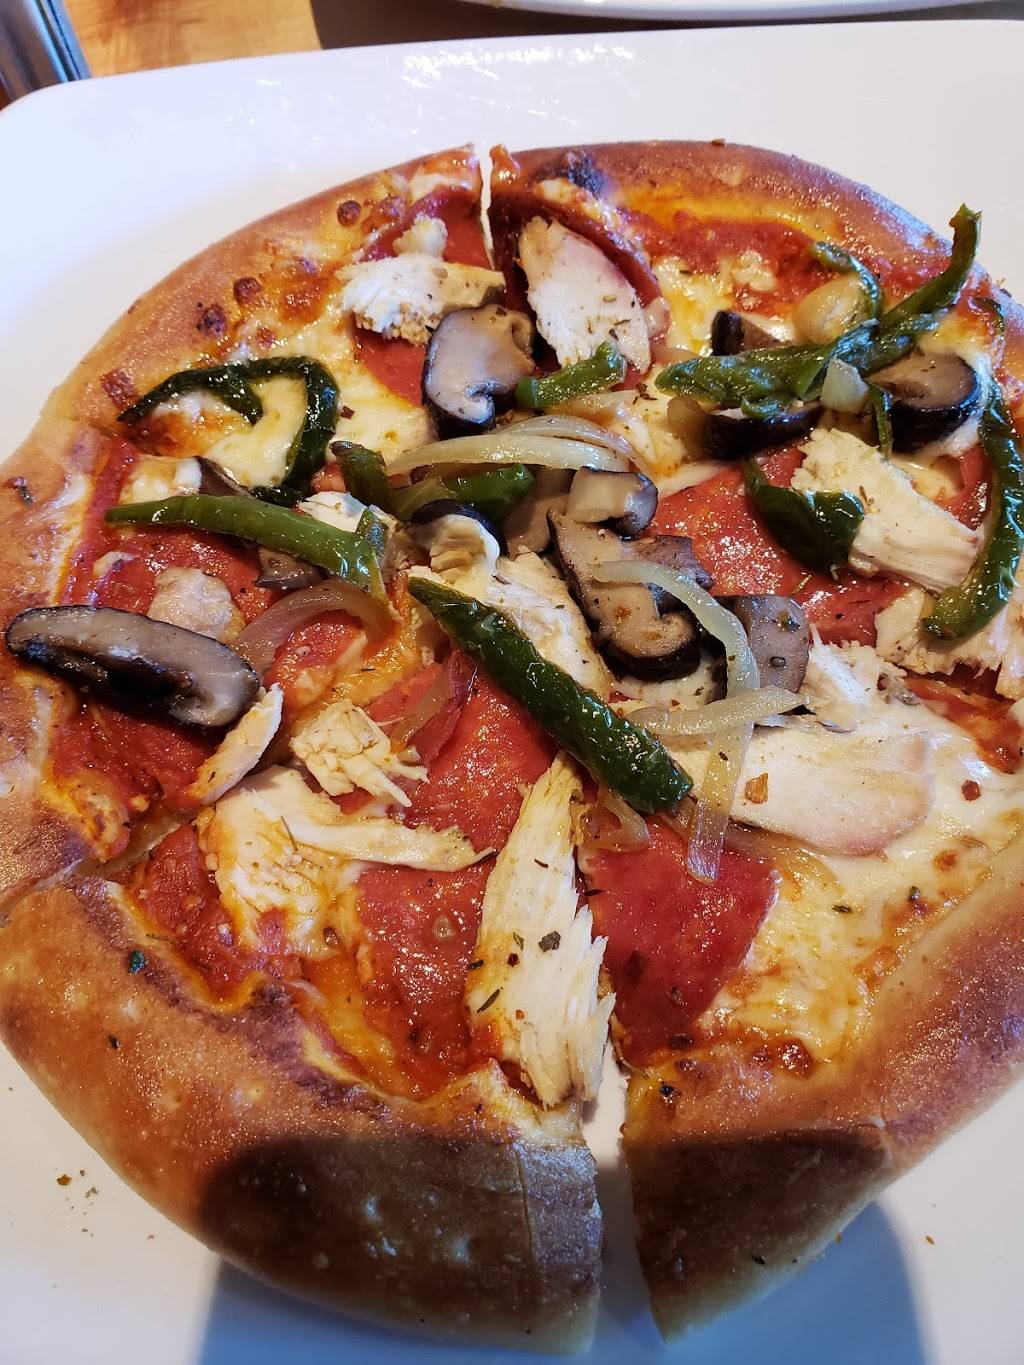 Upper Crust Wood Fired Pizza | restaurant | 9110 S Yale Ave, Tulsa, OK 74137, USA | 9187287326 OR +1 918-728-7326